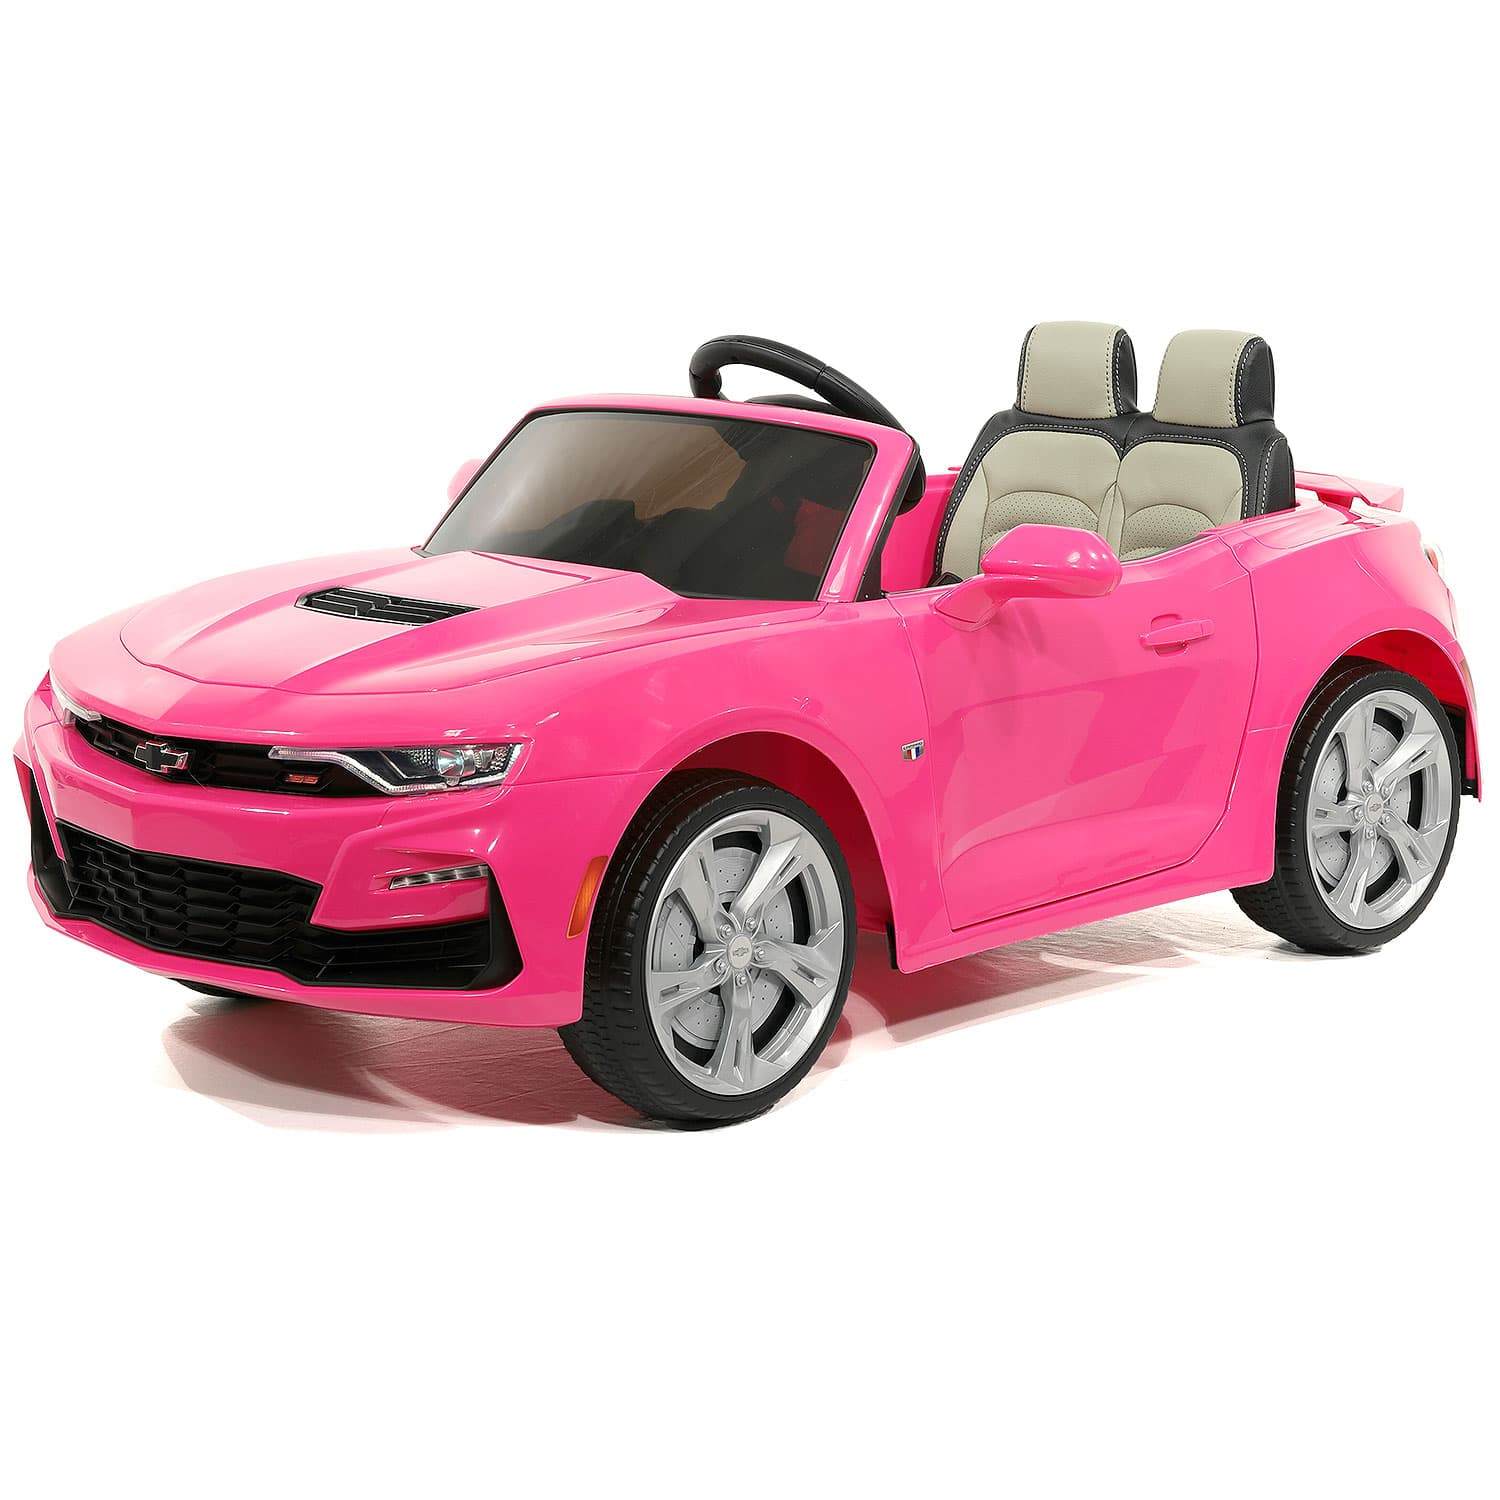 Chevrolet Camaro Ss 12v Kids Ride-on Car With Parental Remote Control | Pink